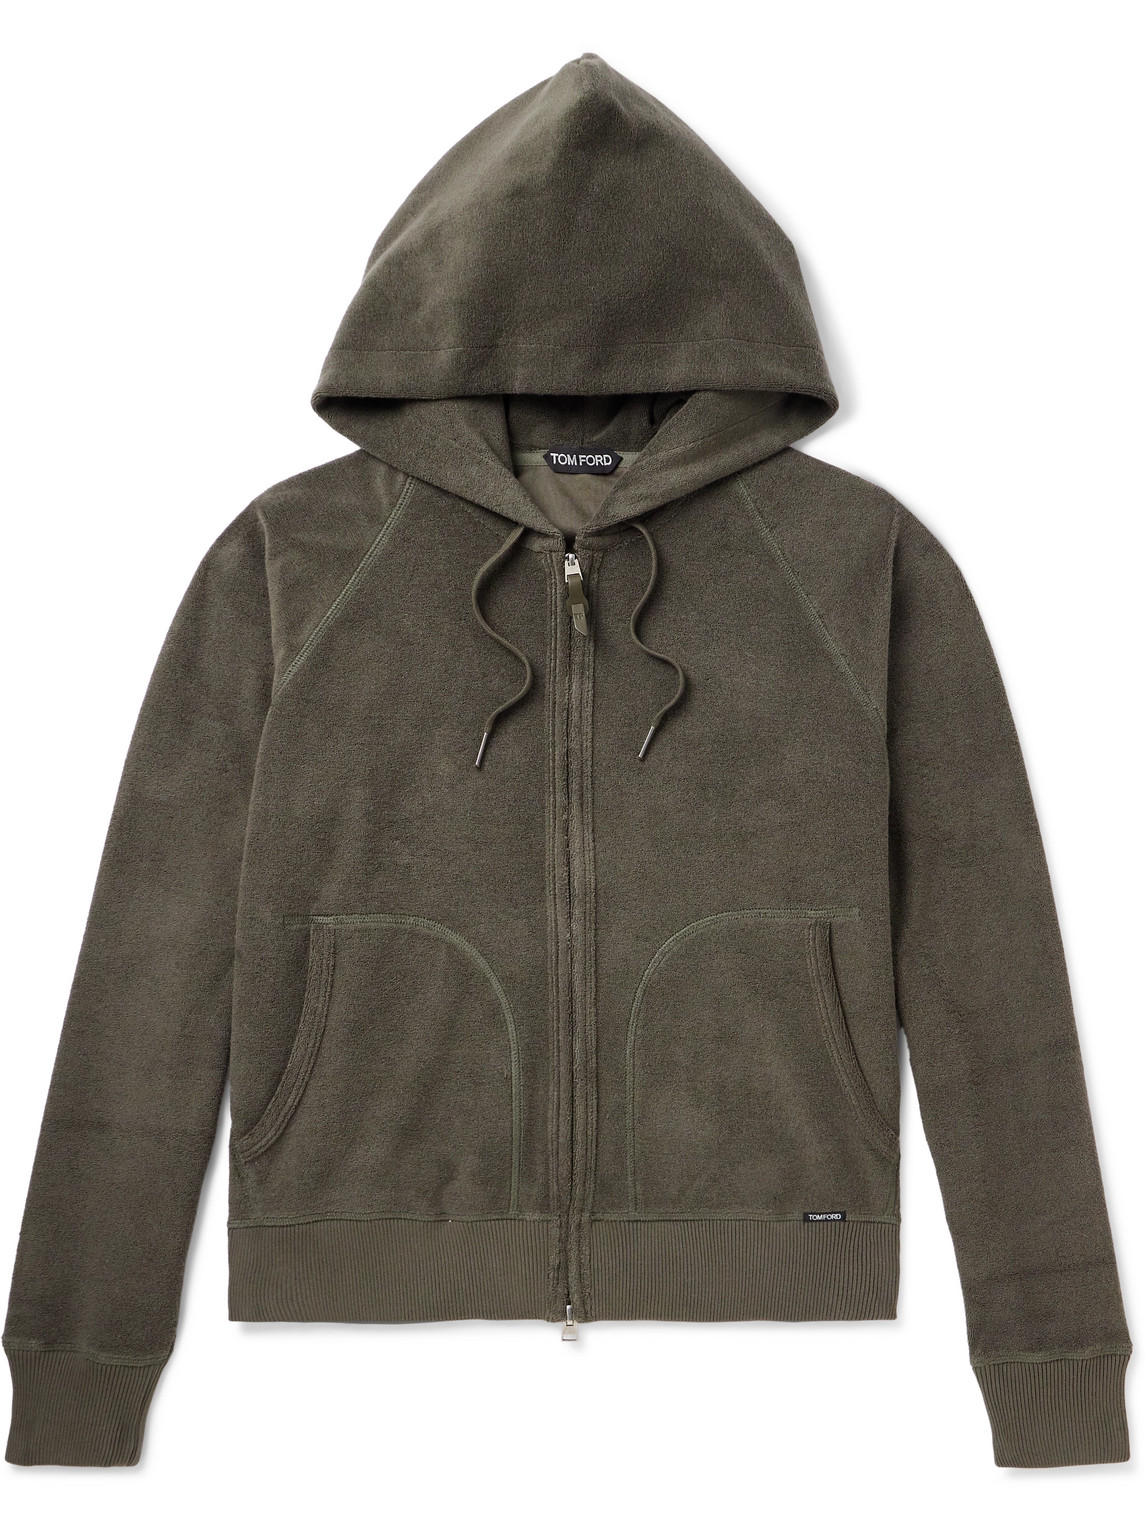 TOM FORD - Towelling Cotton-Terry Zip-Up Hoodie - Men - Green - IT 46 von TOM FORD